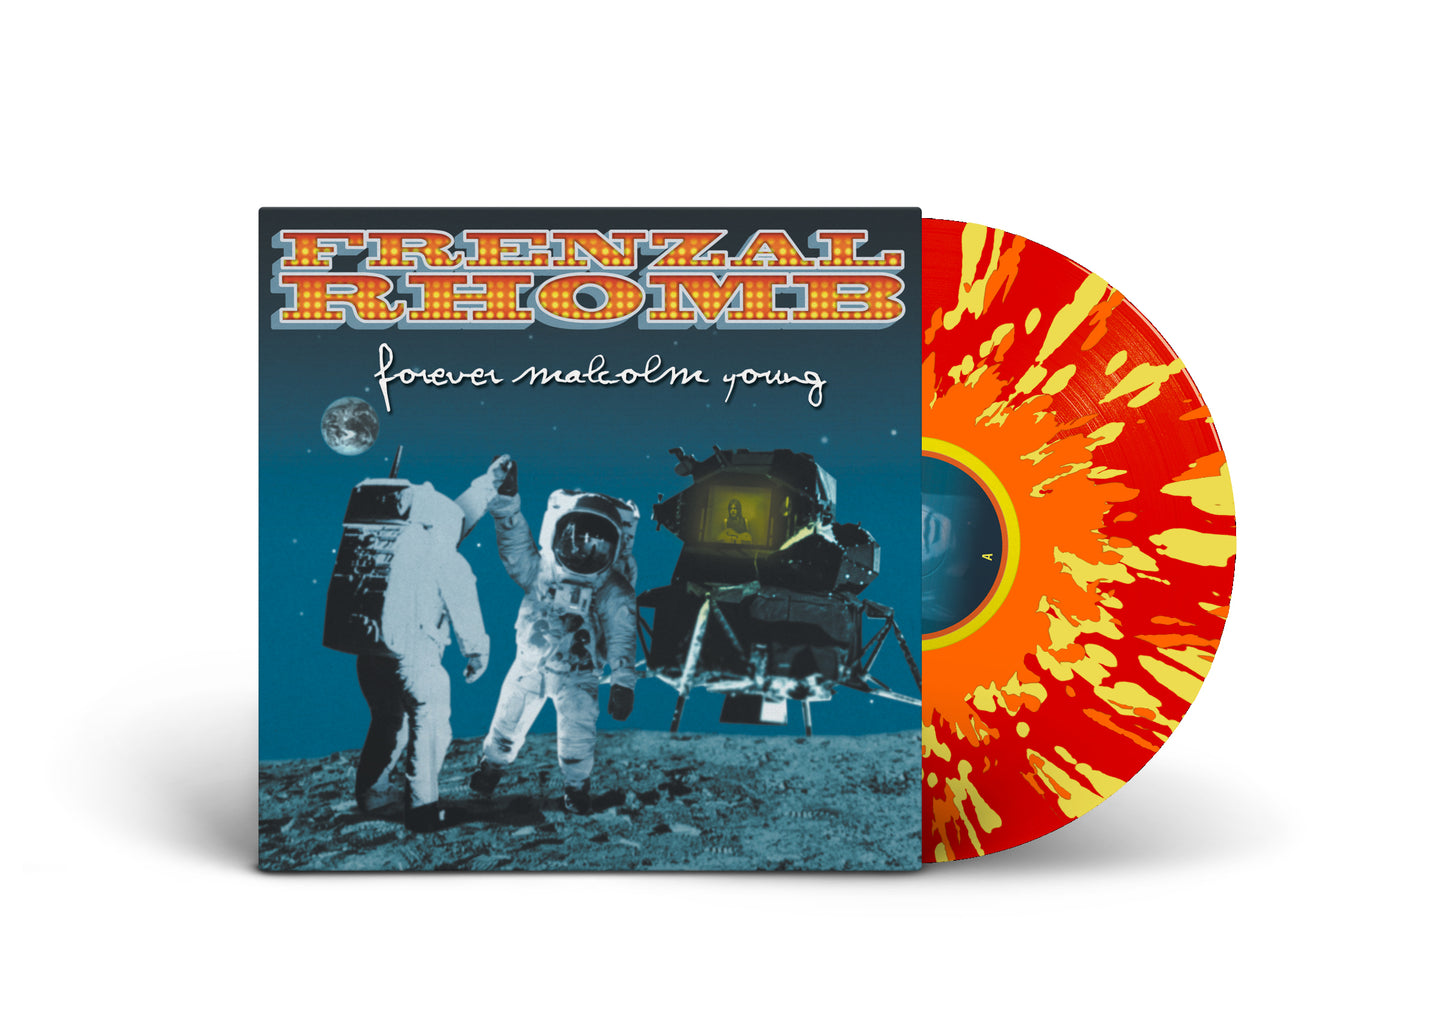 FRENZAL RHOMB - "Forever Malcolm Young" (SBAM) (LP)